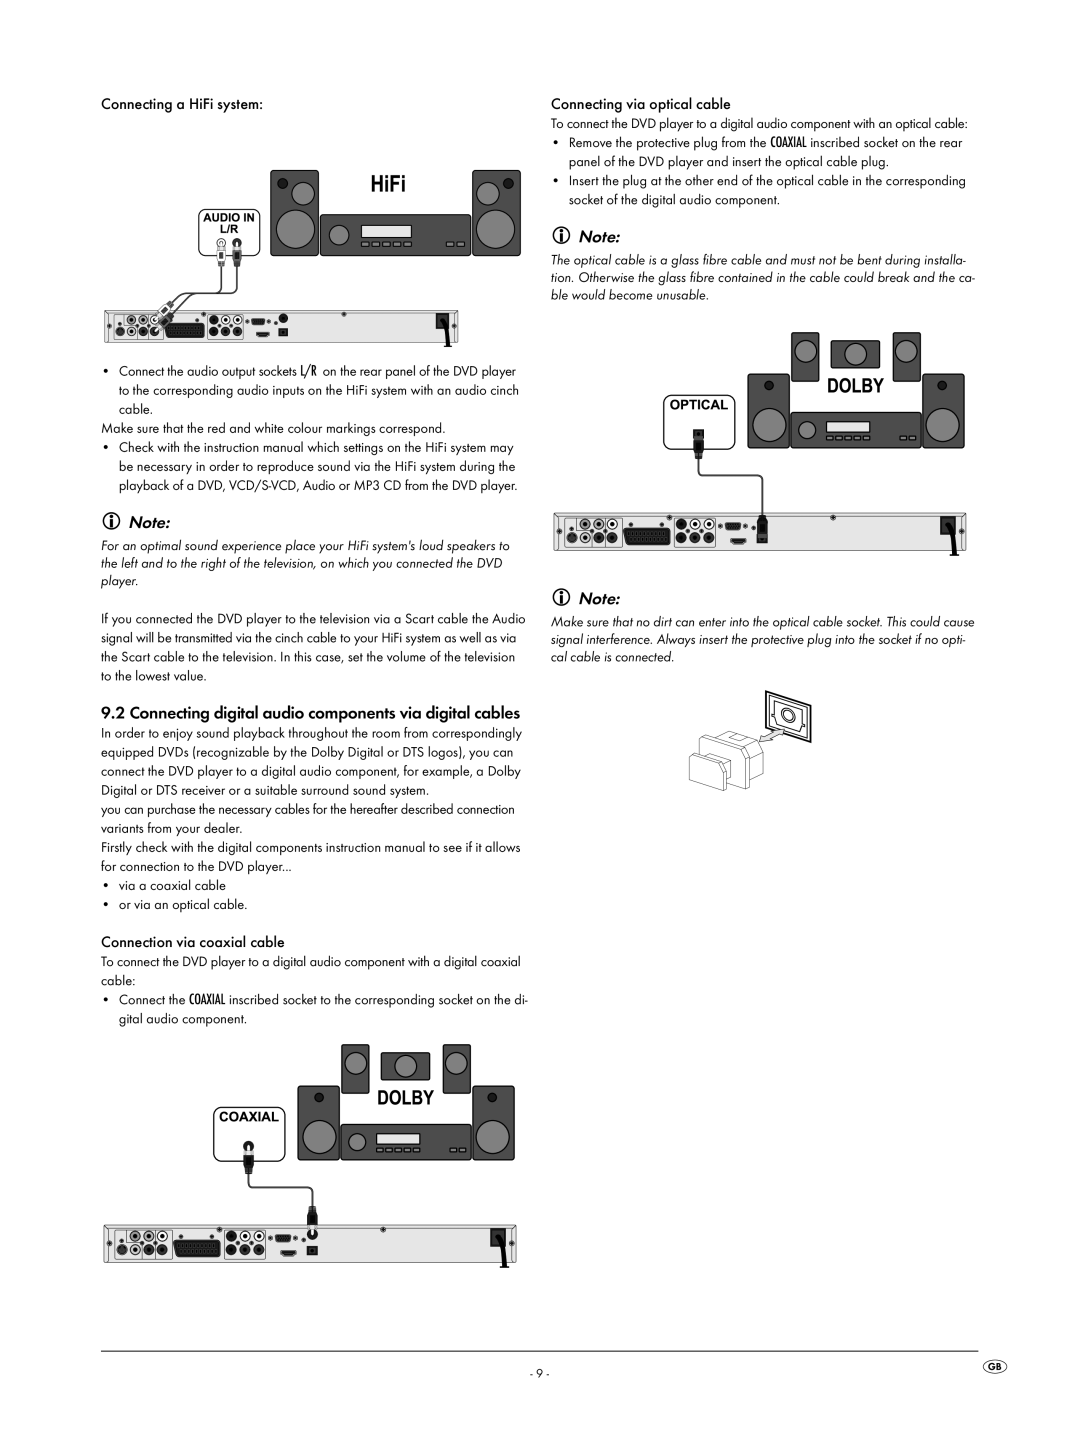 Silvercrest KH6519 operating instructions Connecting digital audio components via digital cables, Connecting a HiFi system 